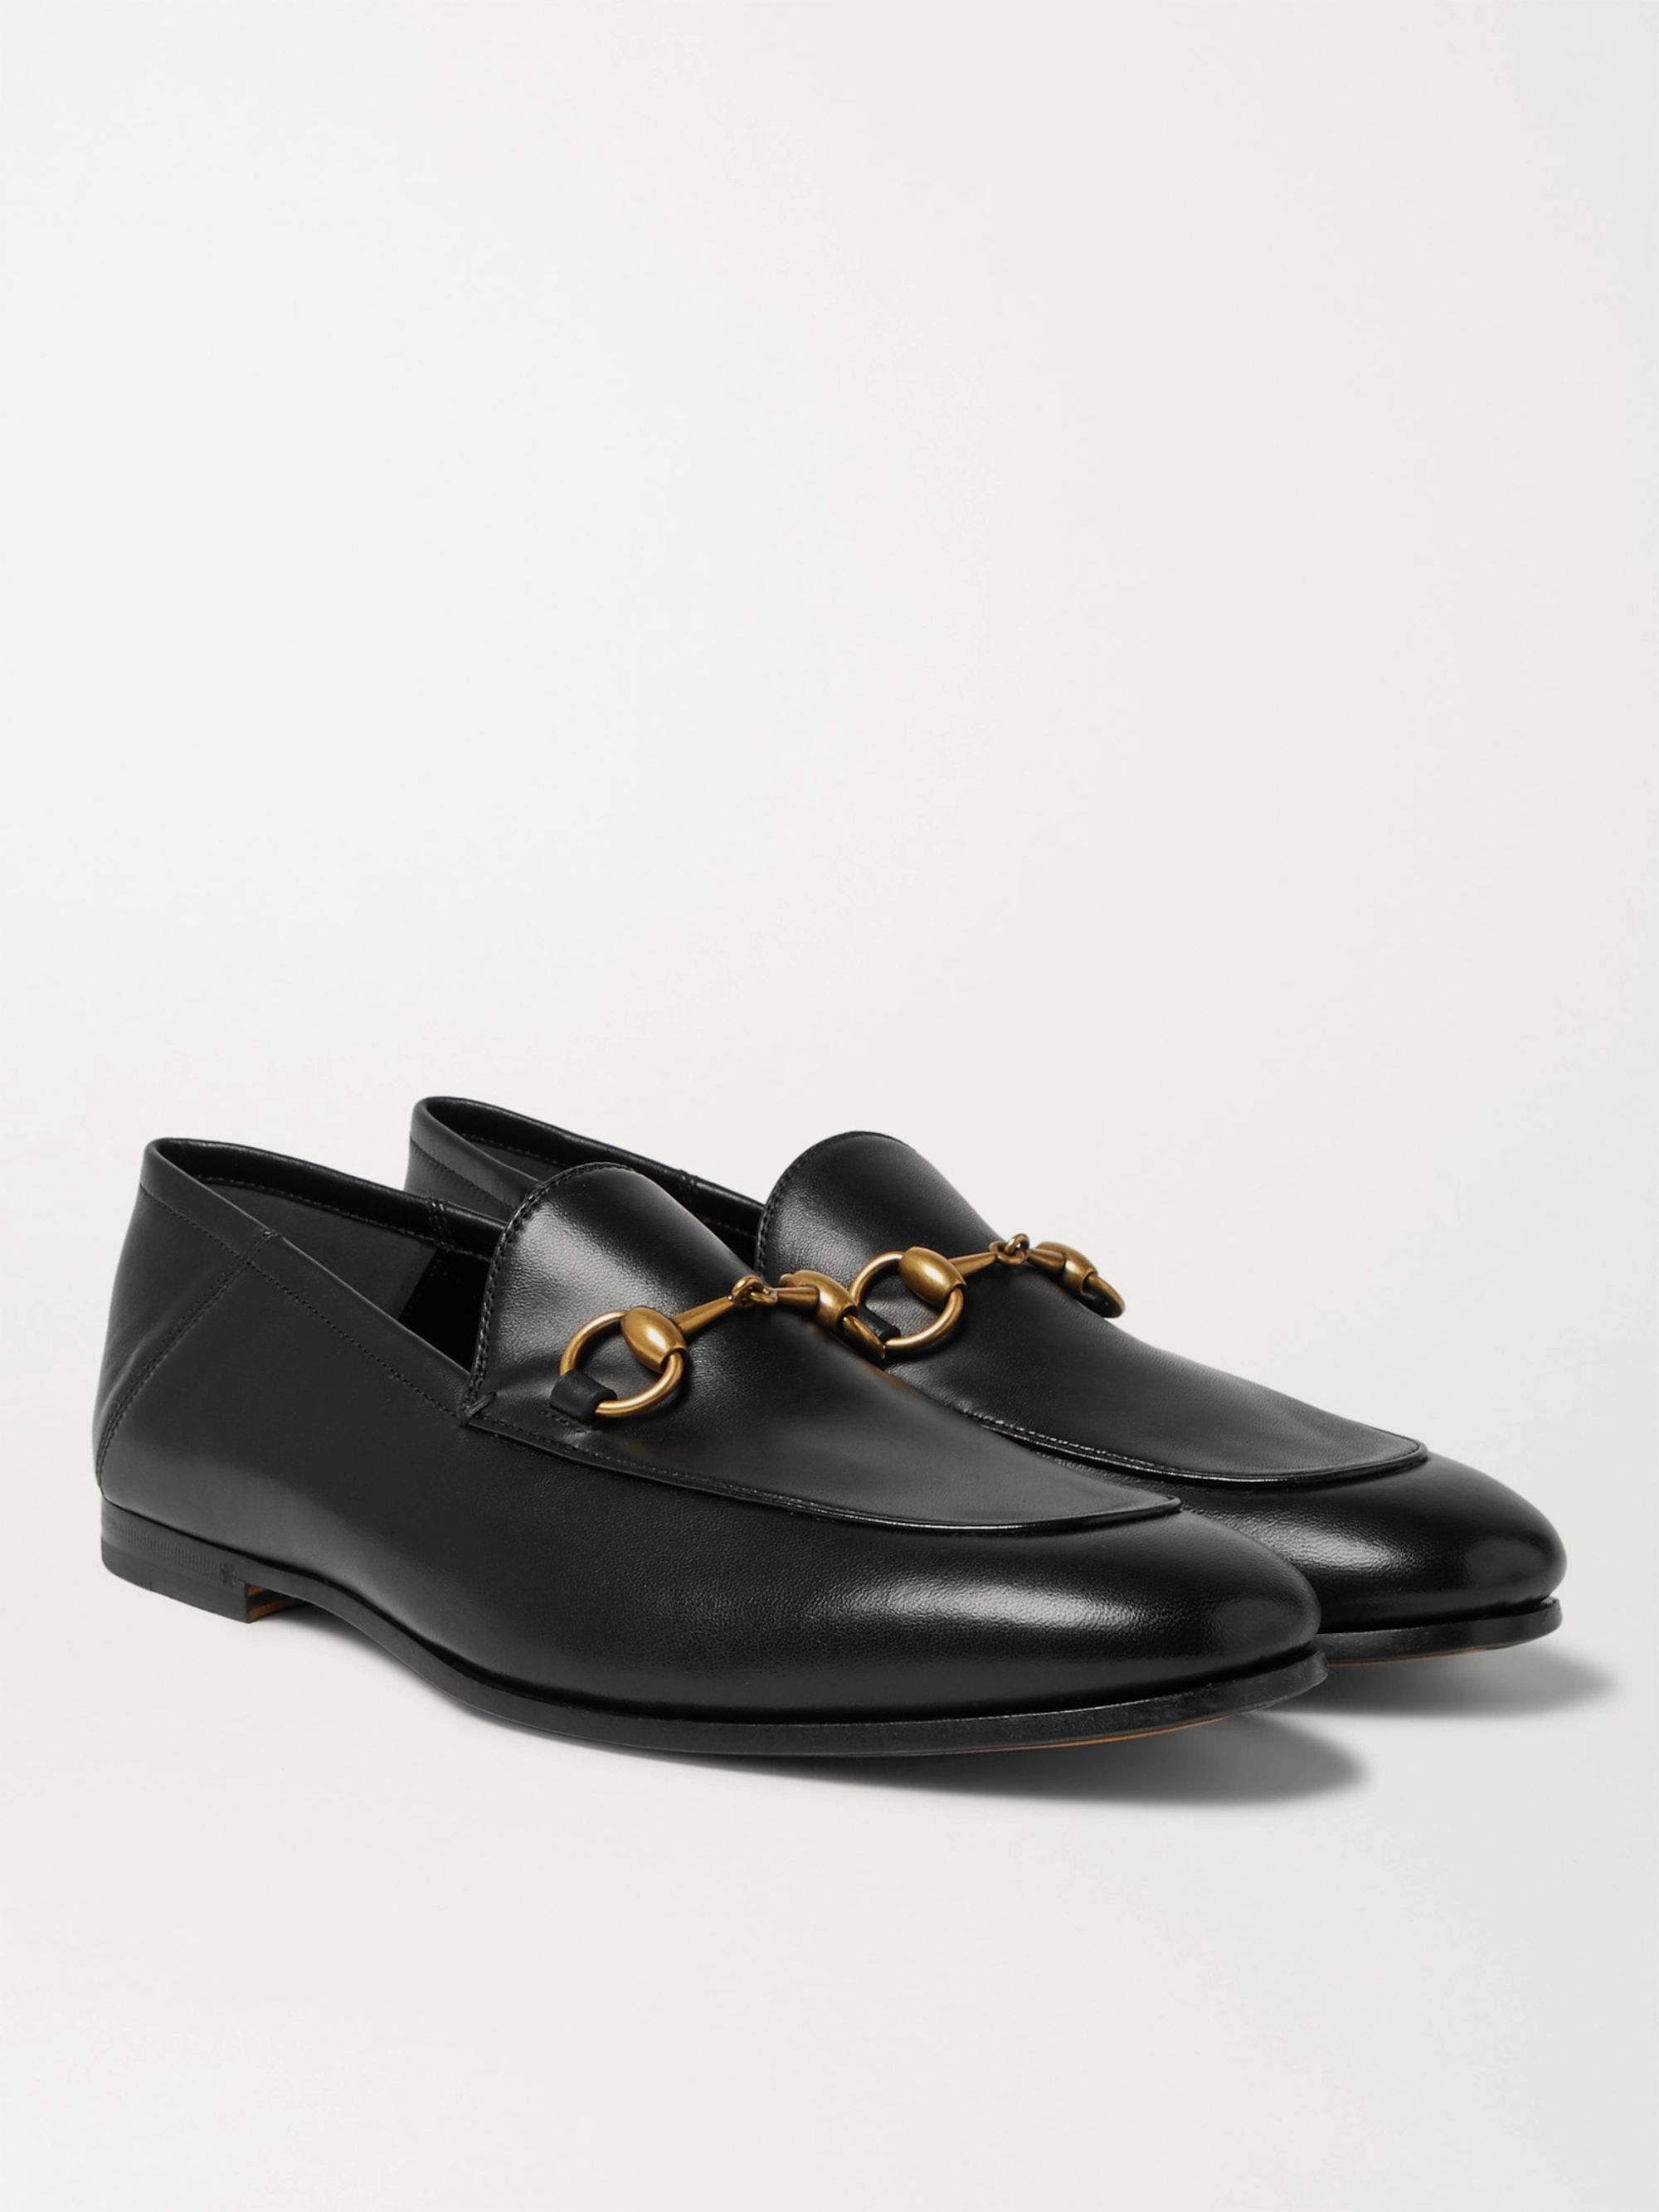 gucci brixton leather horsebit loafers